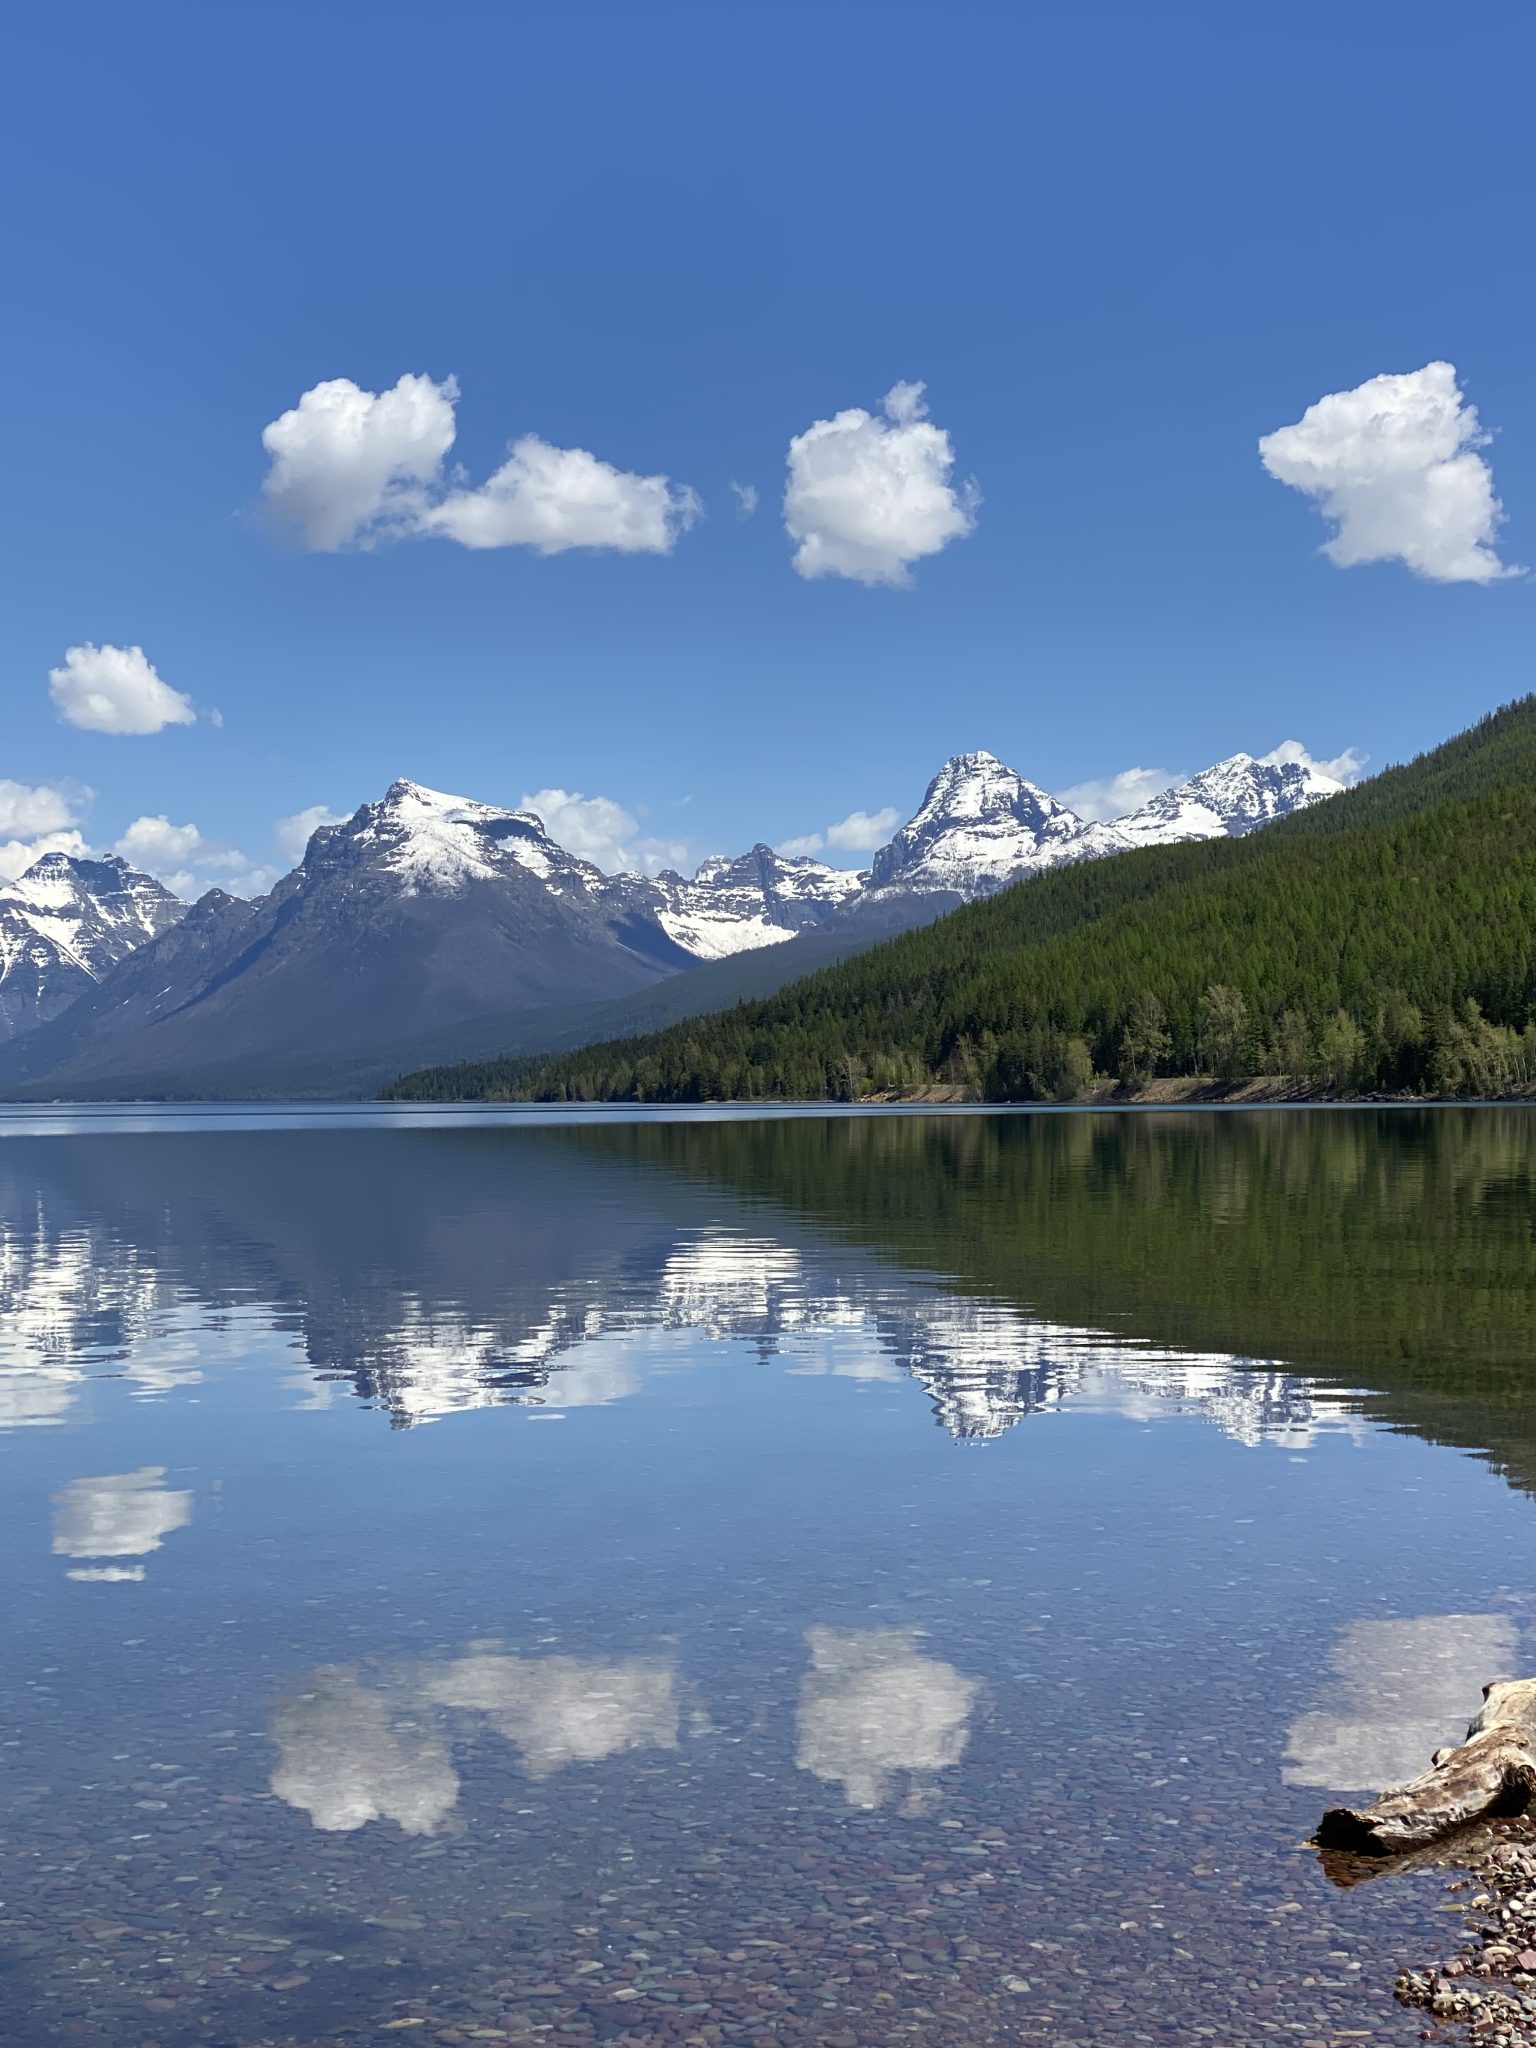 Lake McDonald in Glacier National Park.  Water in the immediate foreground, reflecting the snowy mountain in the distance. Small puffy clouds in an otherwise clear sky.